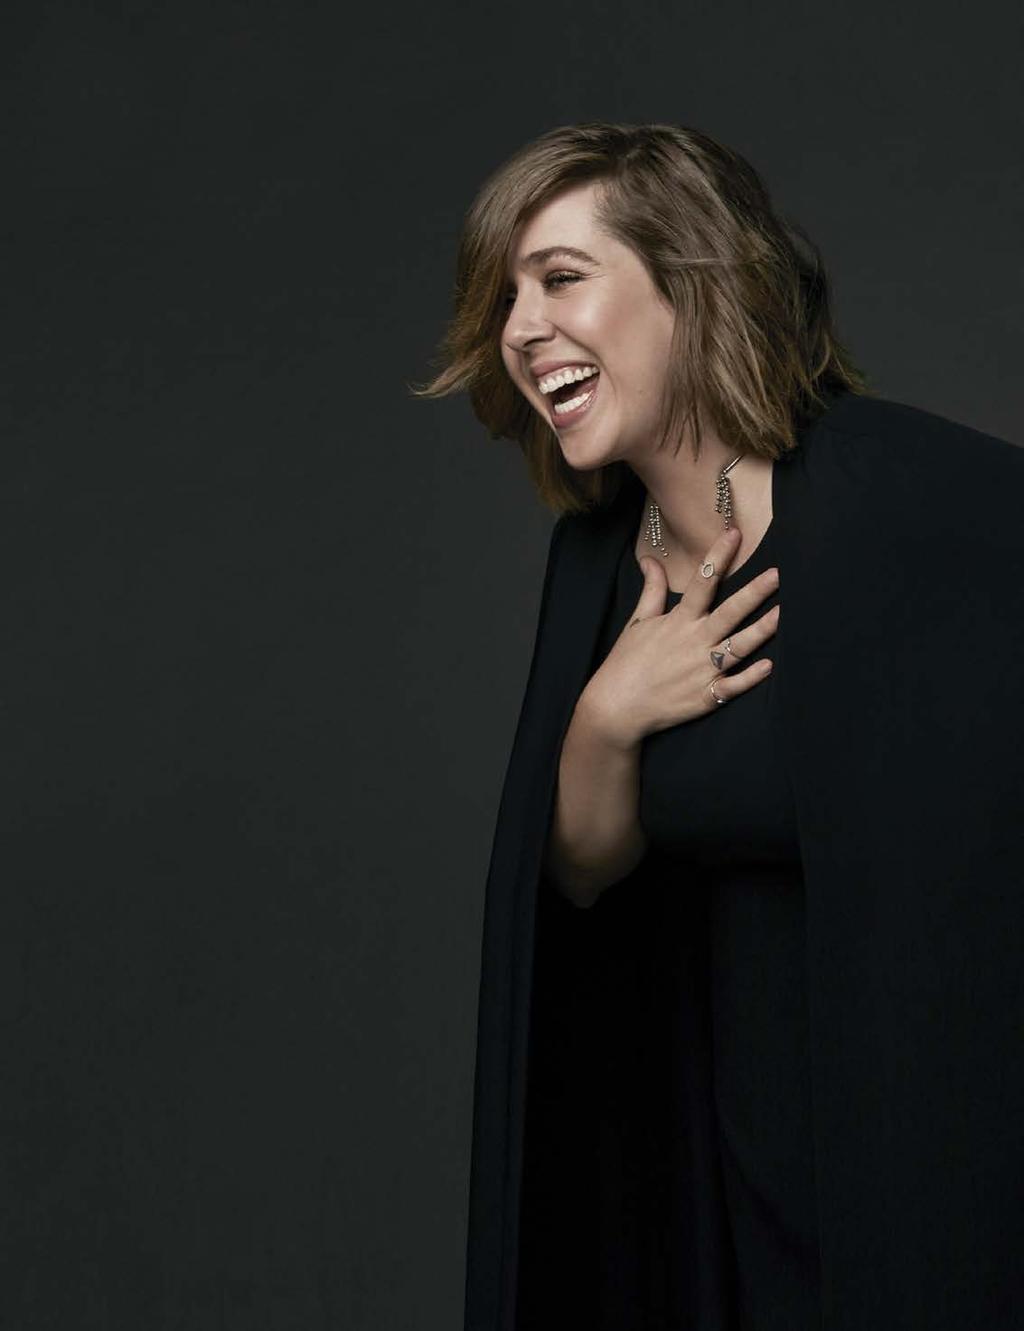 12 Serena Ryder THU OCT 18 7:30PM A six-time Juno award winner, Serena Ryder has achieved gold certifications for her albums If Your Memory Serves You Well and Is It O.